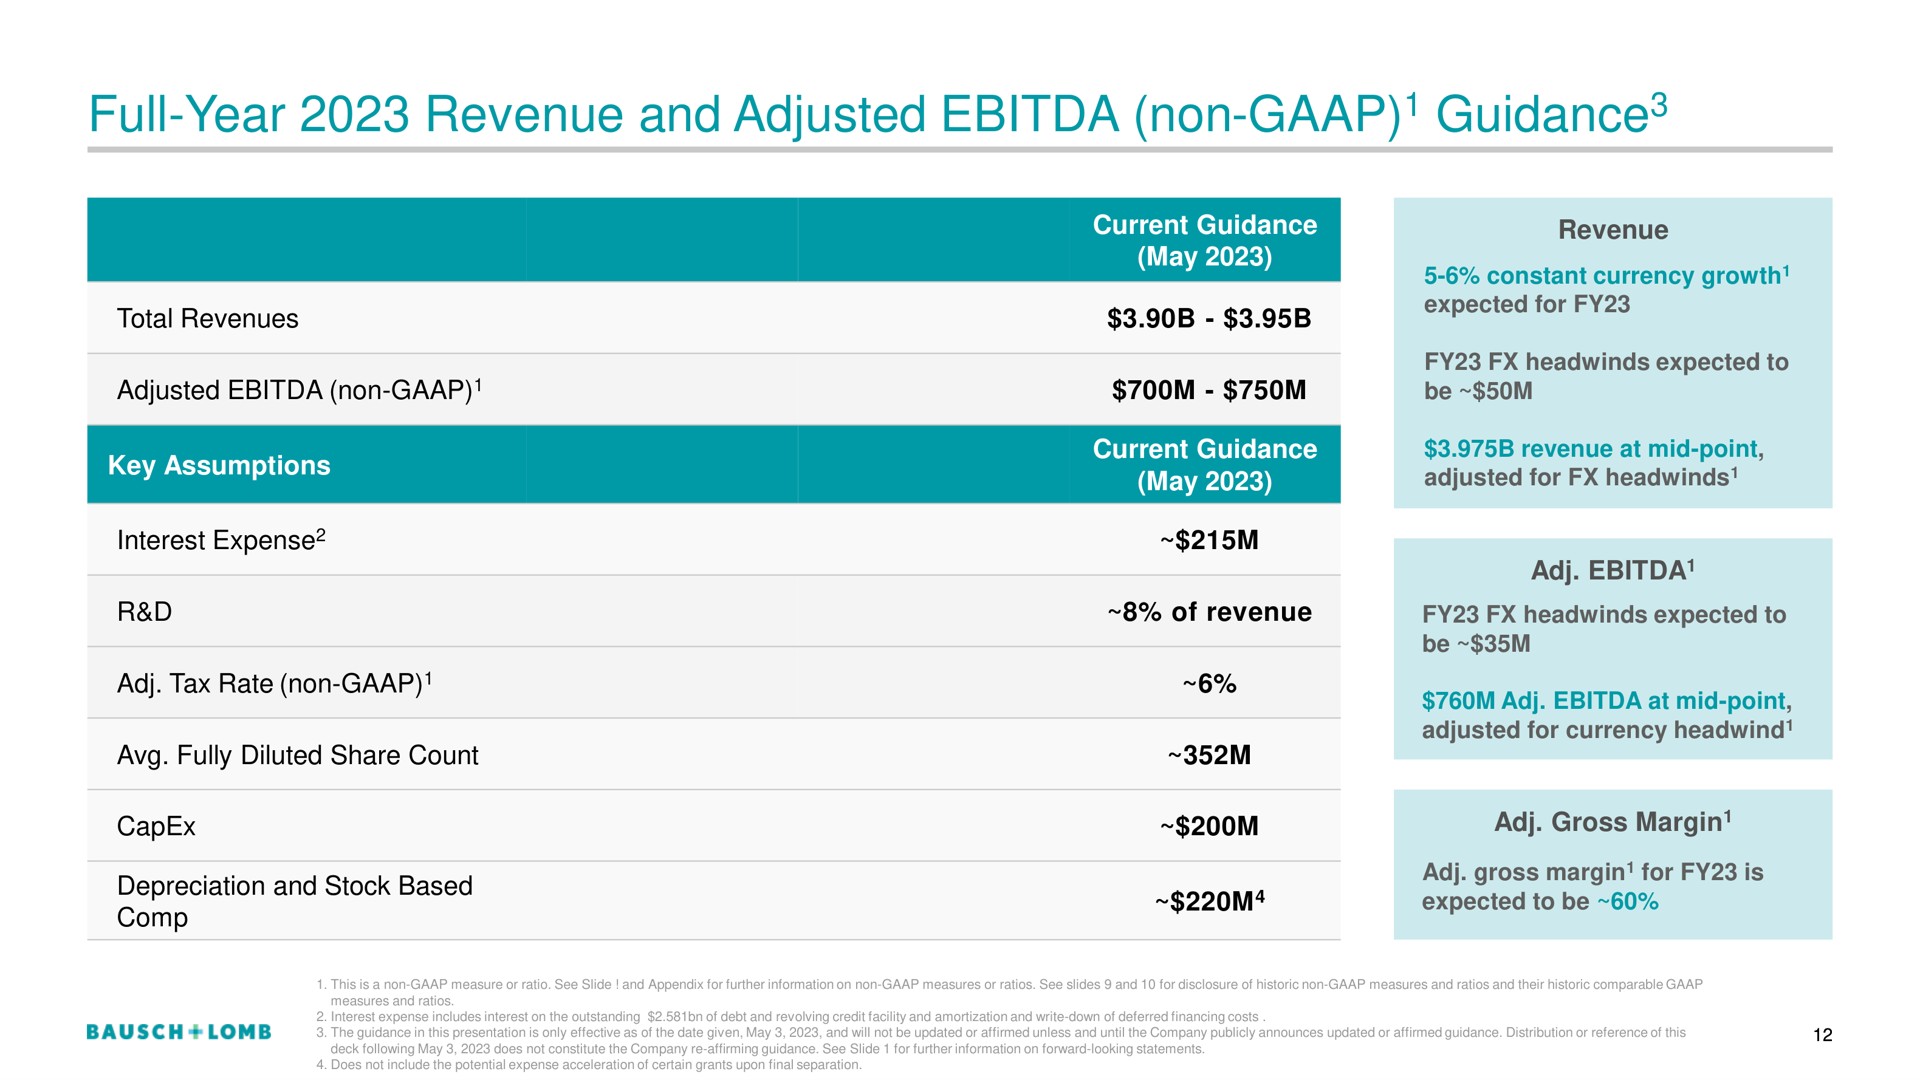 full year revenue and adjusted non guidance guidance | Bausch+Lomb